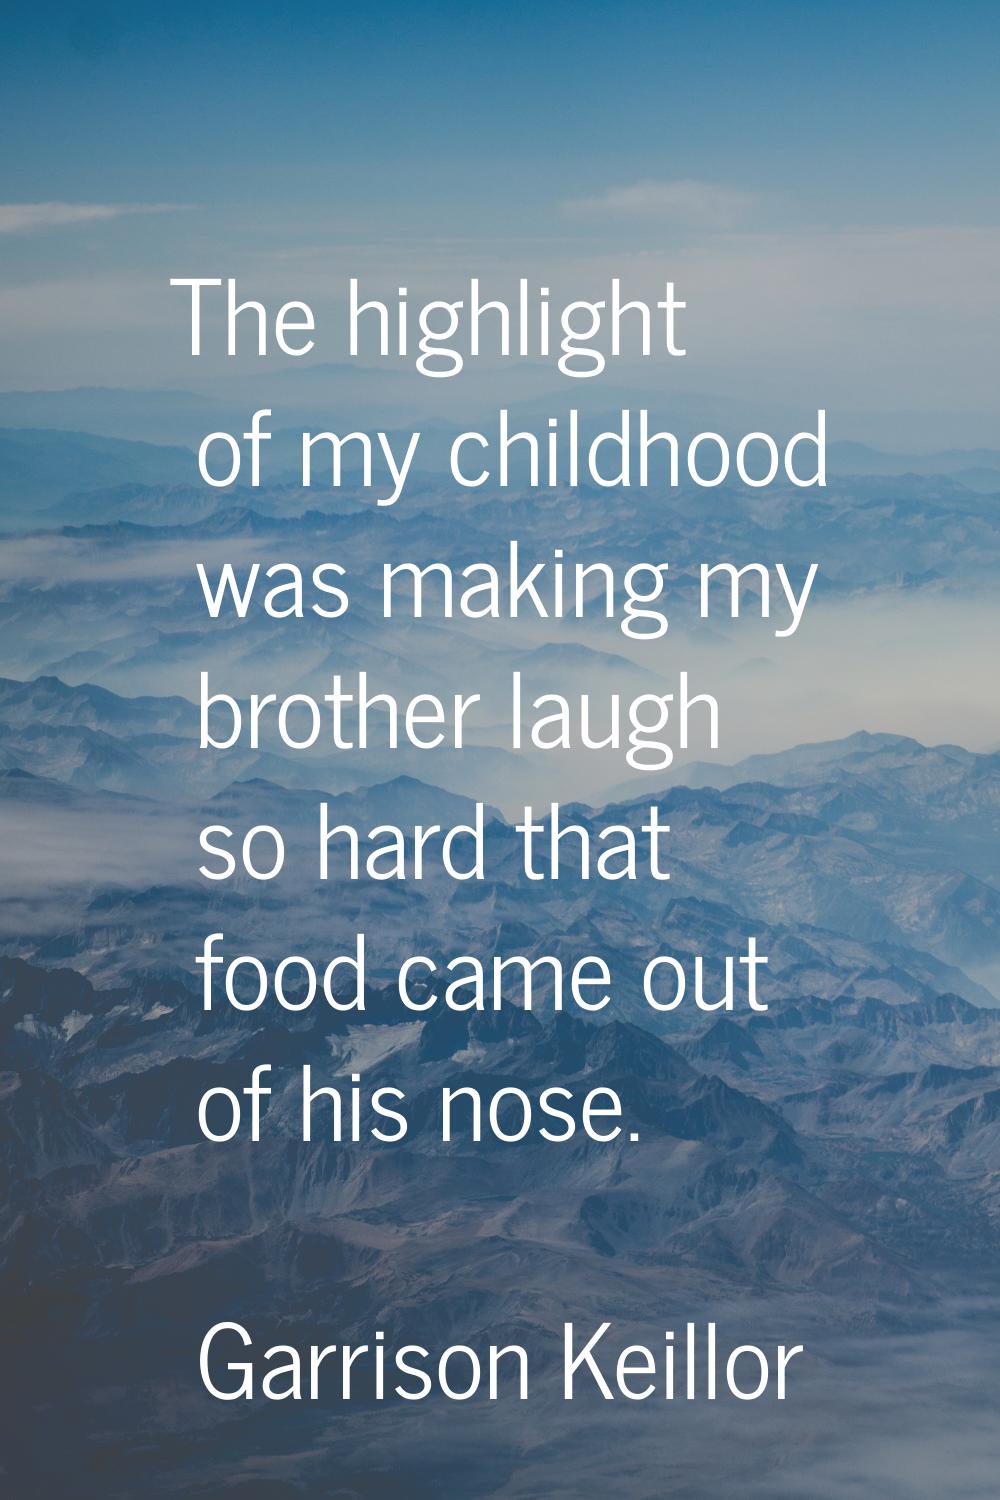 The highlight of my childhood was making my brother laugh so hard that food came out of his nose.